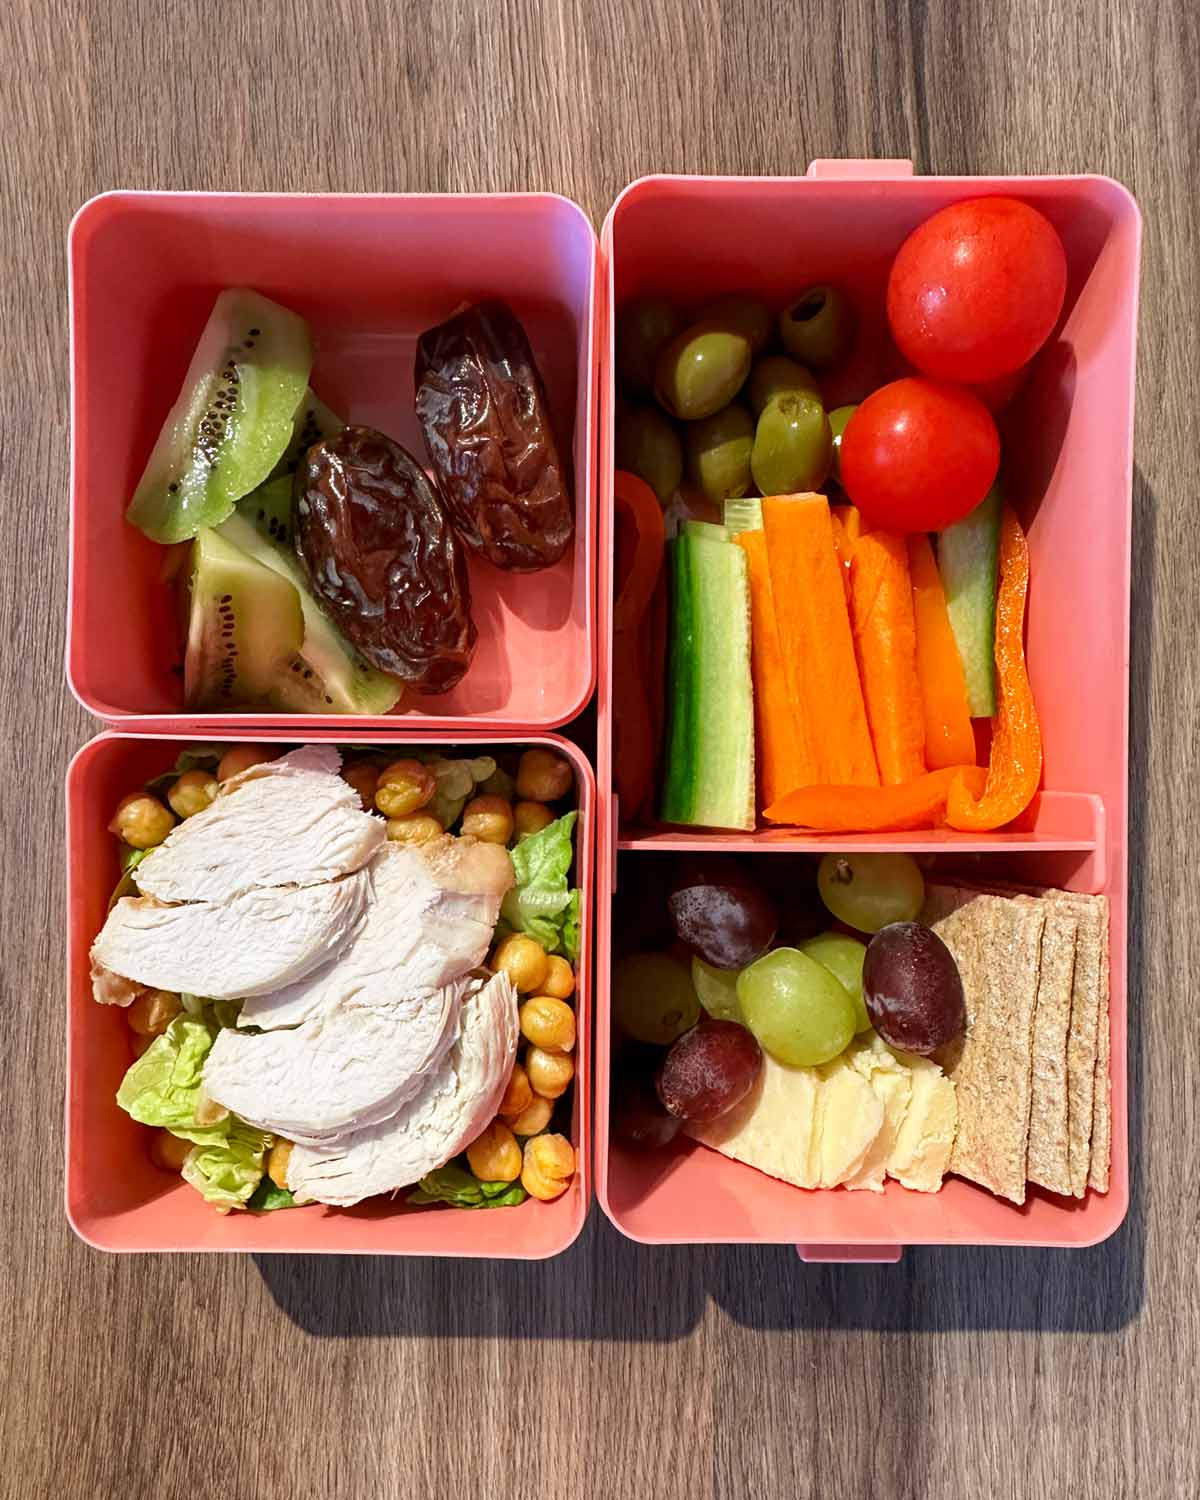 A three compartment pink bento box filled a small chicken salad, vegetables and fruit.